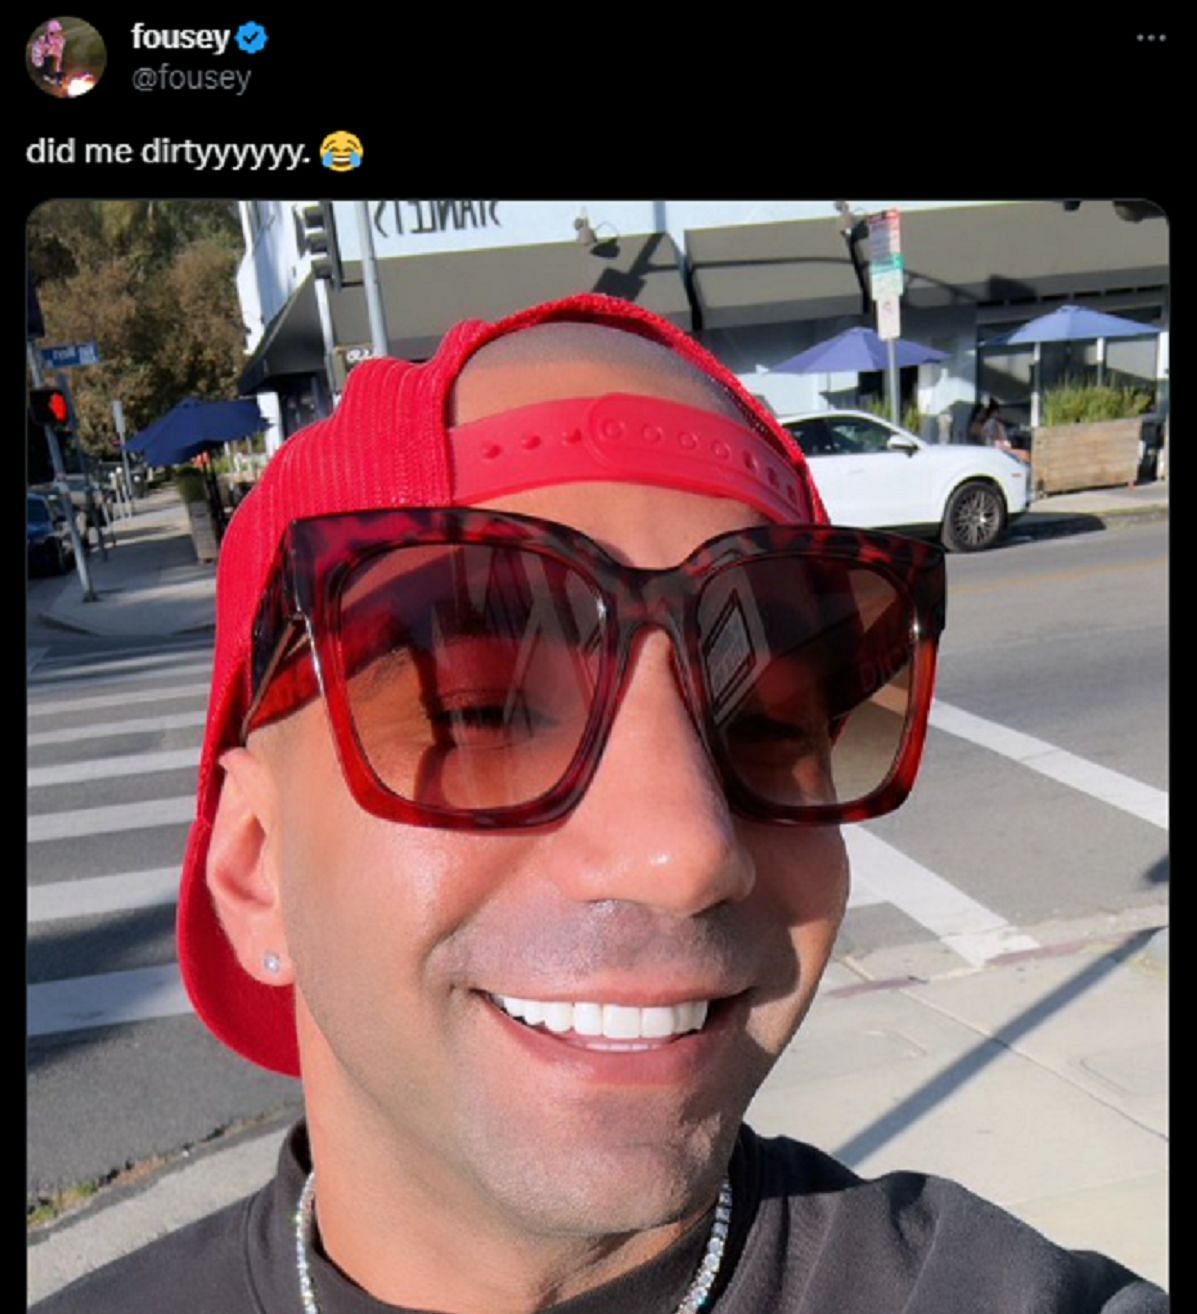 Yousef shares his brand new look on social media (Image via X/@Fousey)